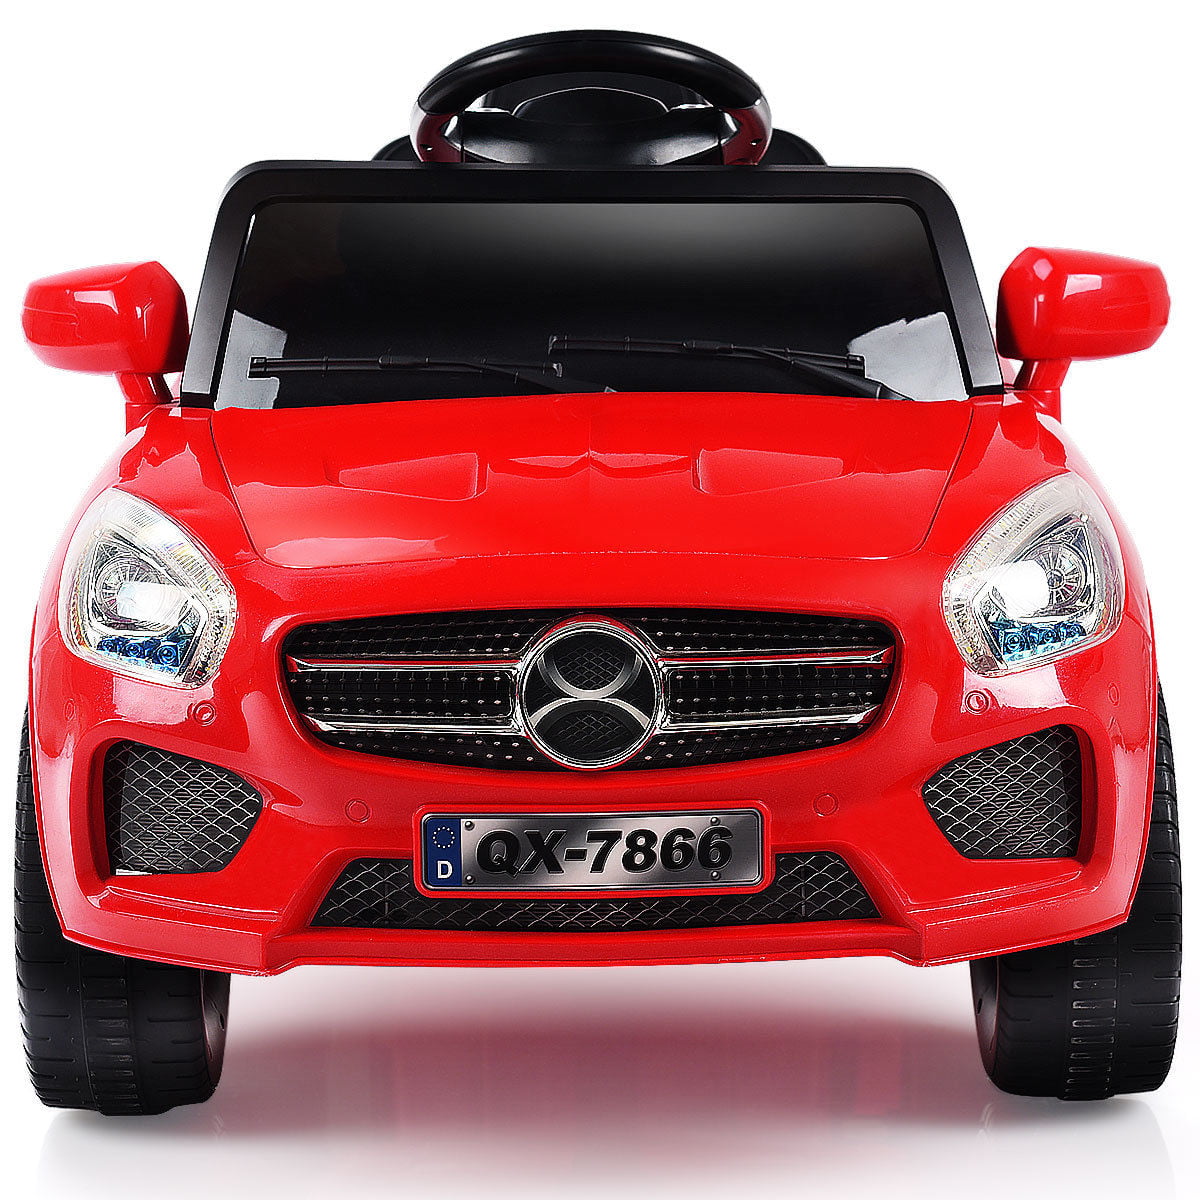 Kids Ride On Car 6V RC Remote Control Battery Powered w/ LED Lights MP3 Red New 